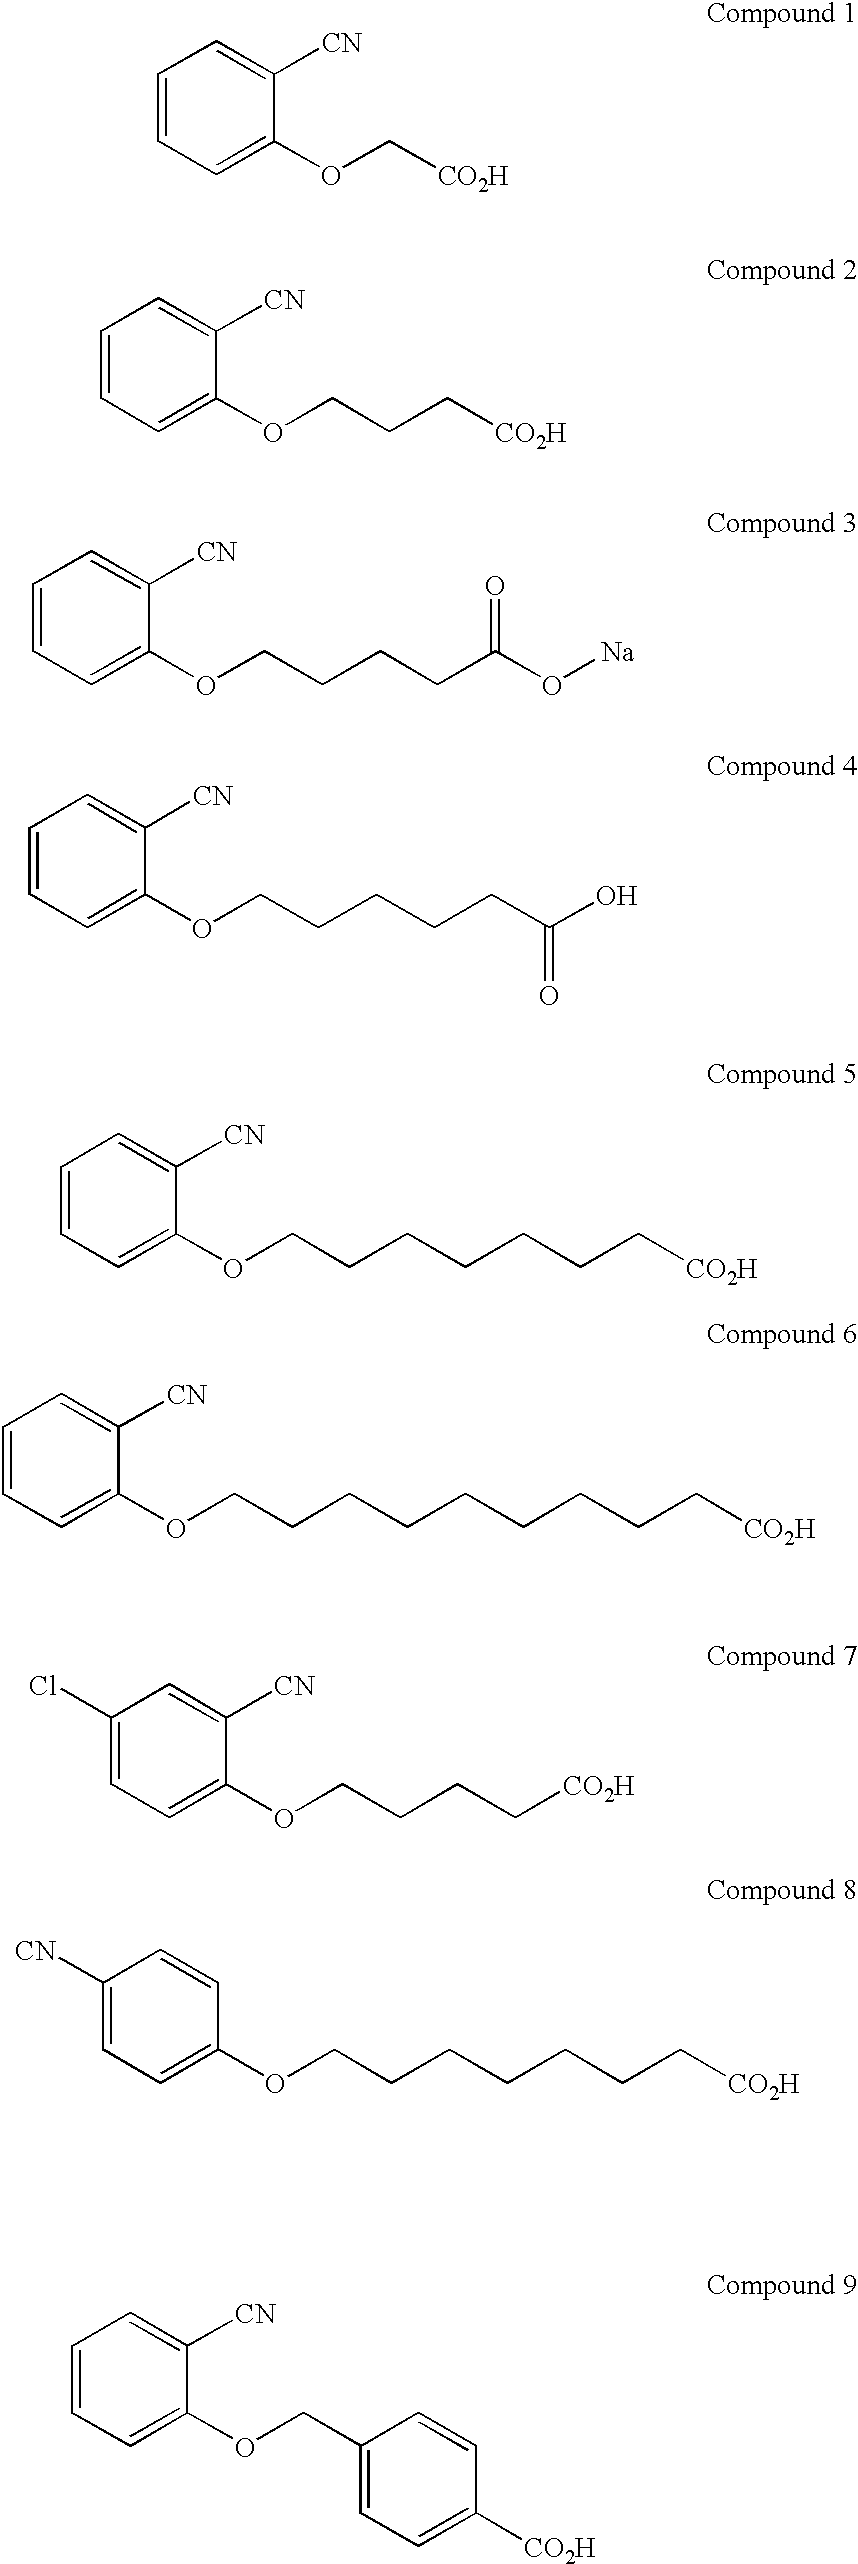 Cyanophenoxy carboxylic acid compounds and compositions for delivering active agents